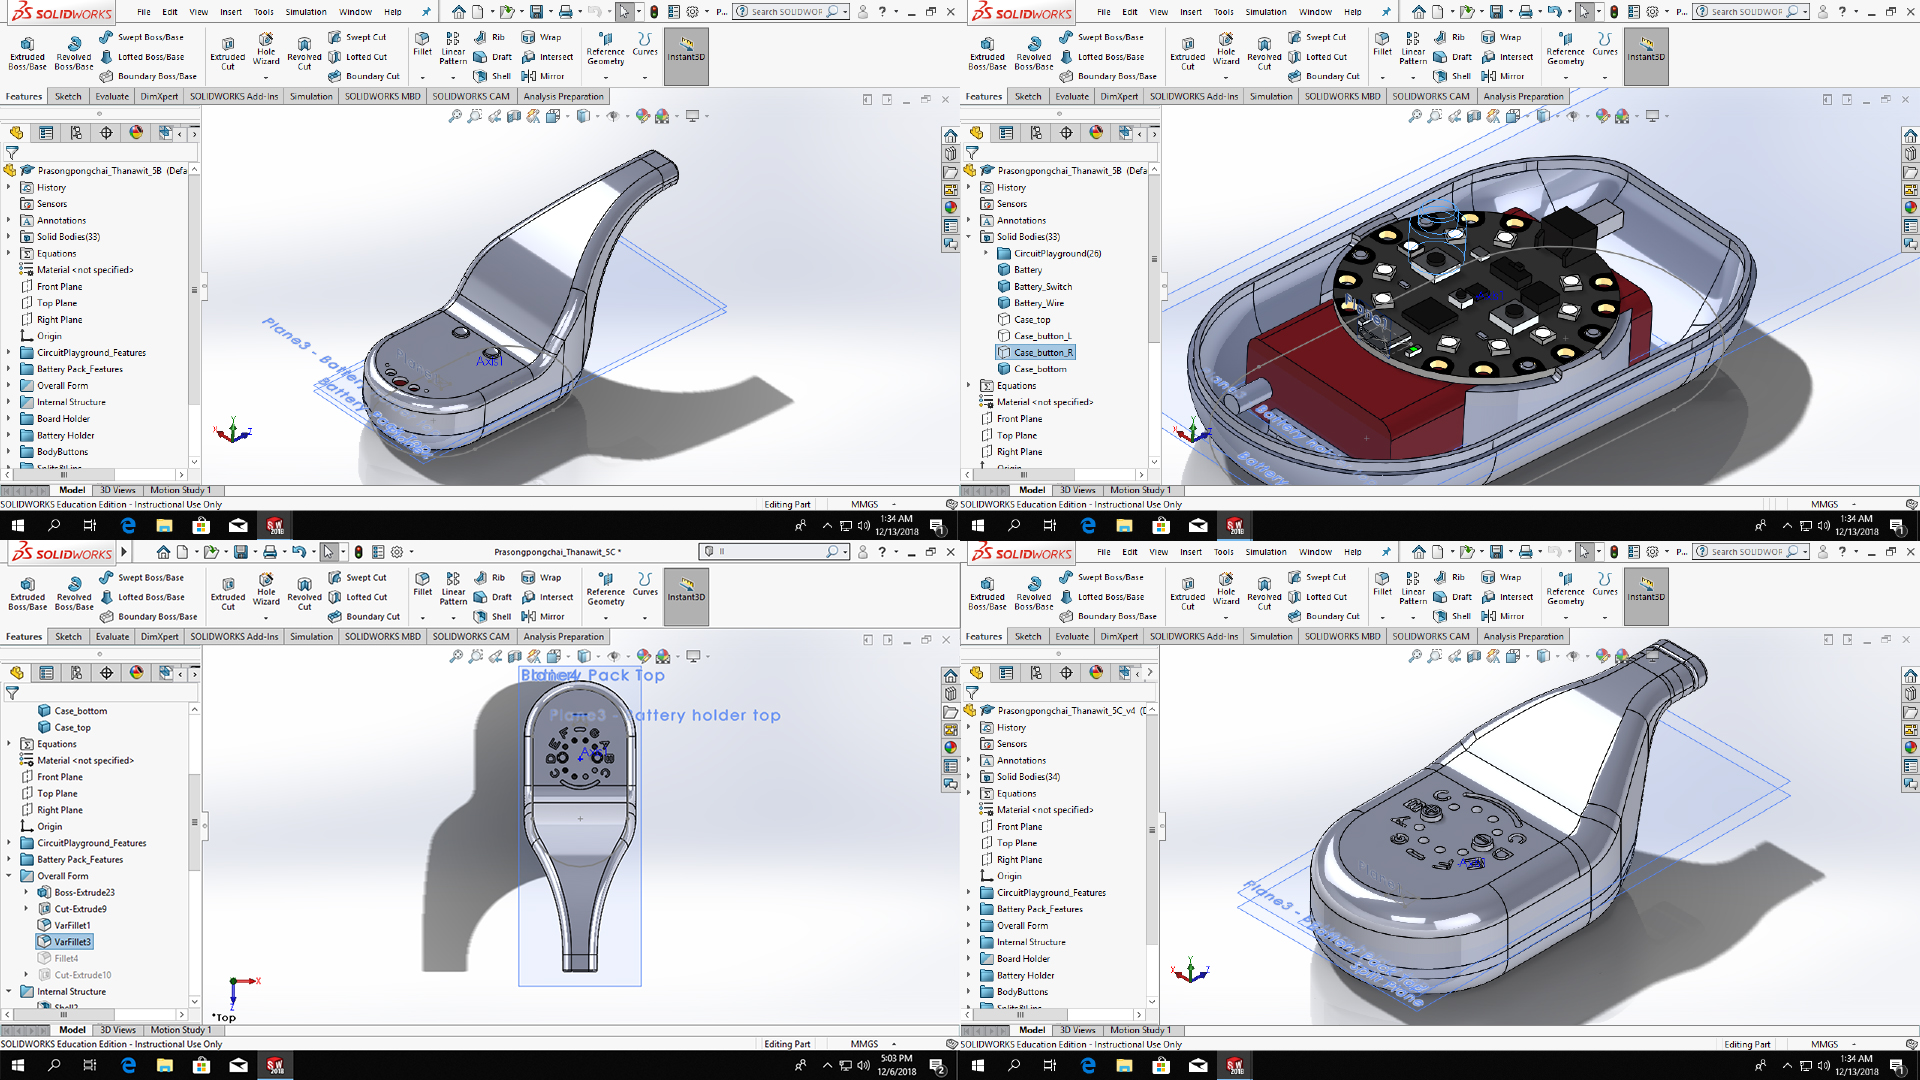 Screenshots from the 3D modeling process in SolidWorks showing multiple versions of the design